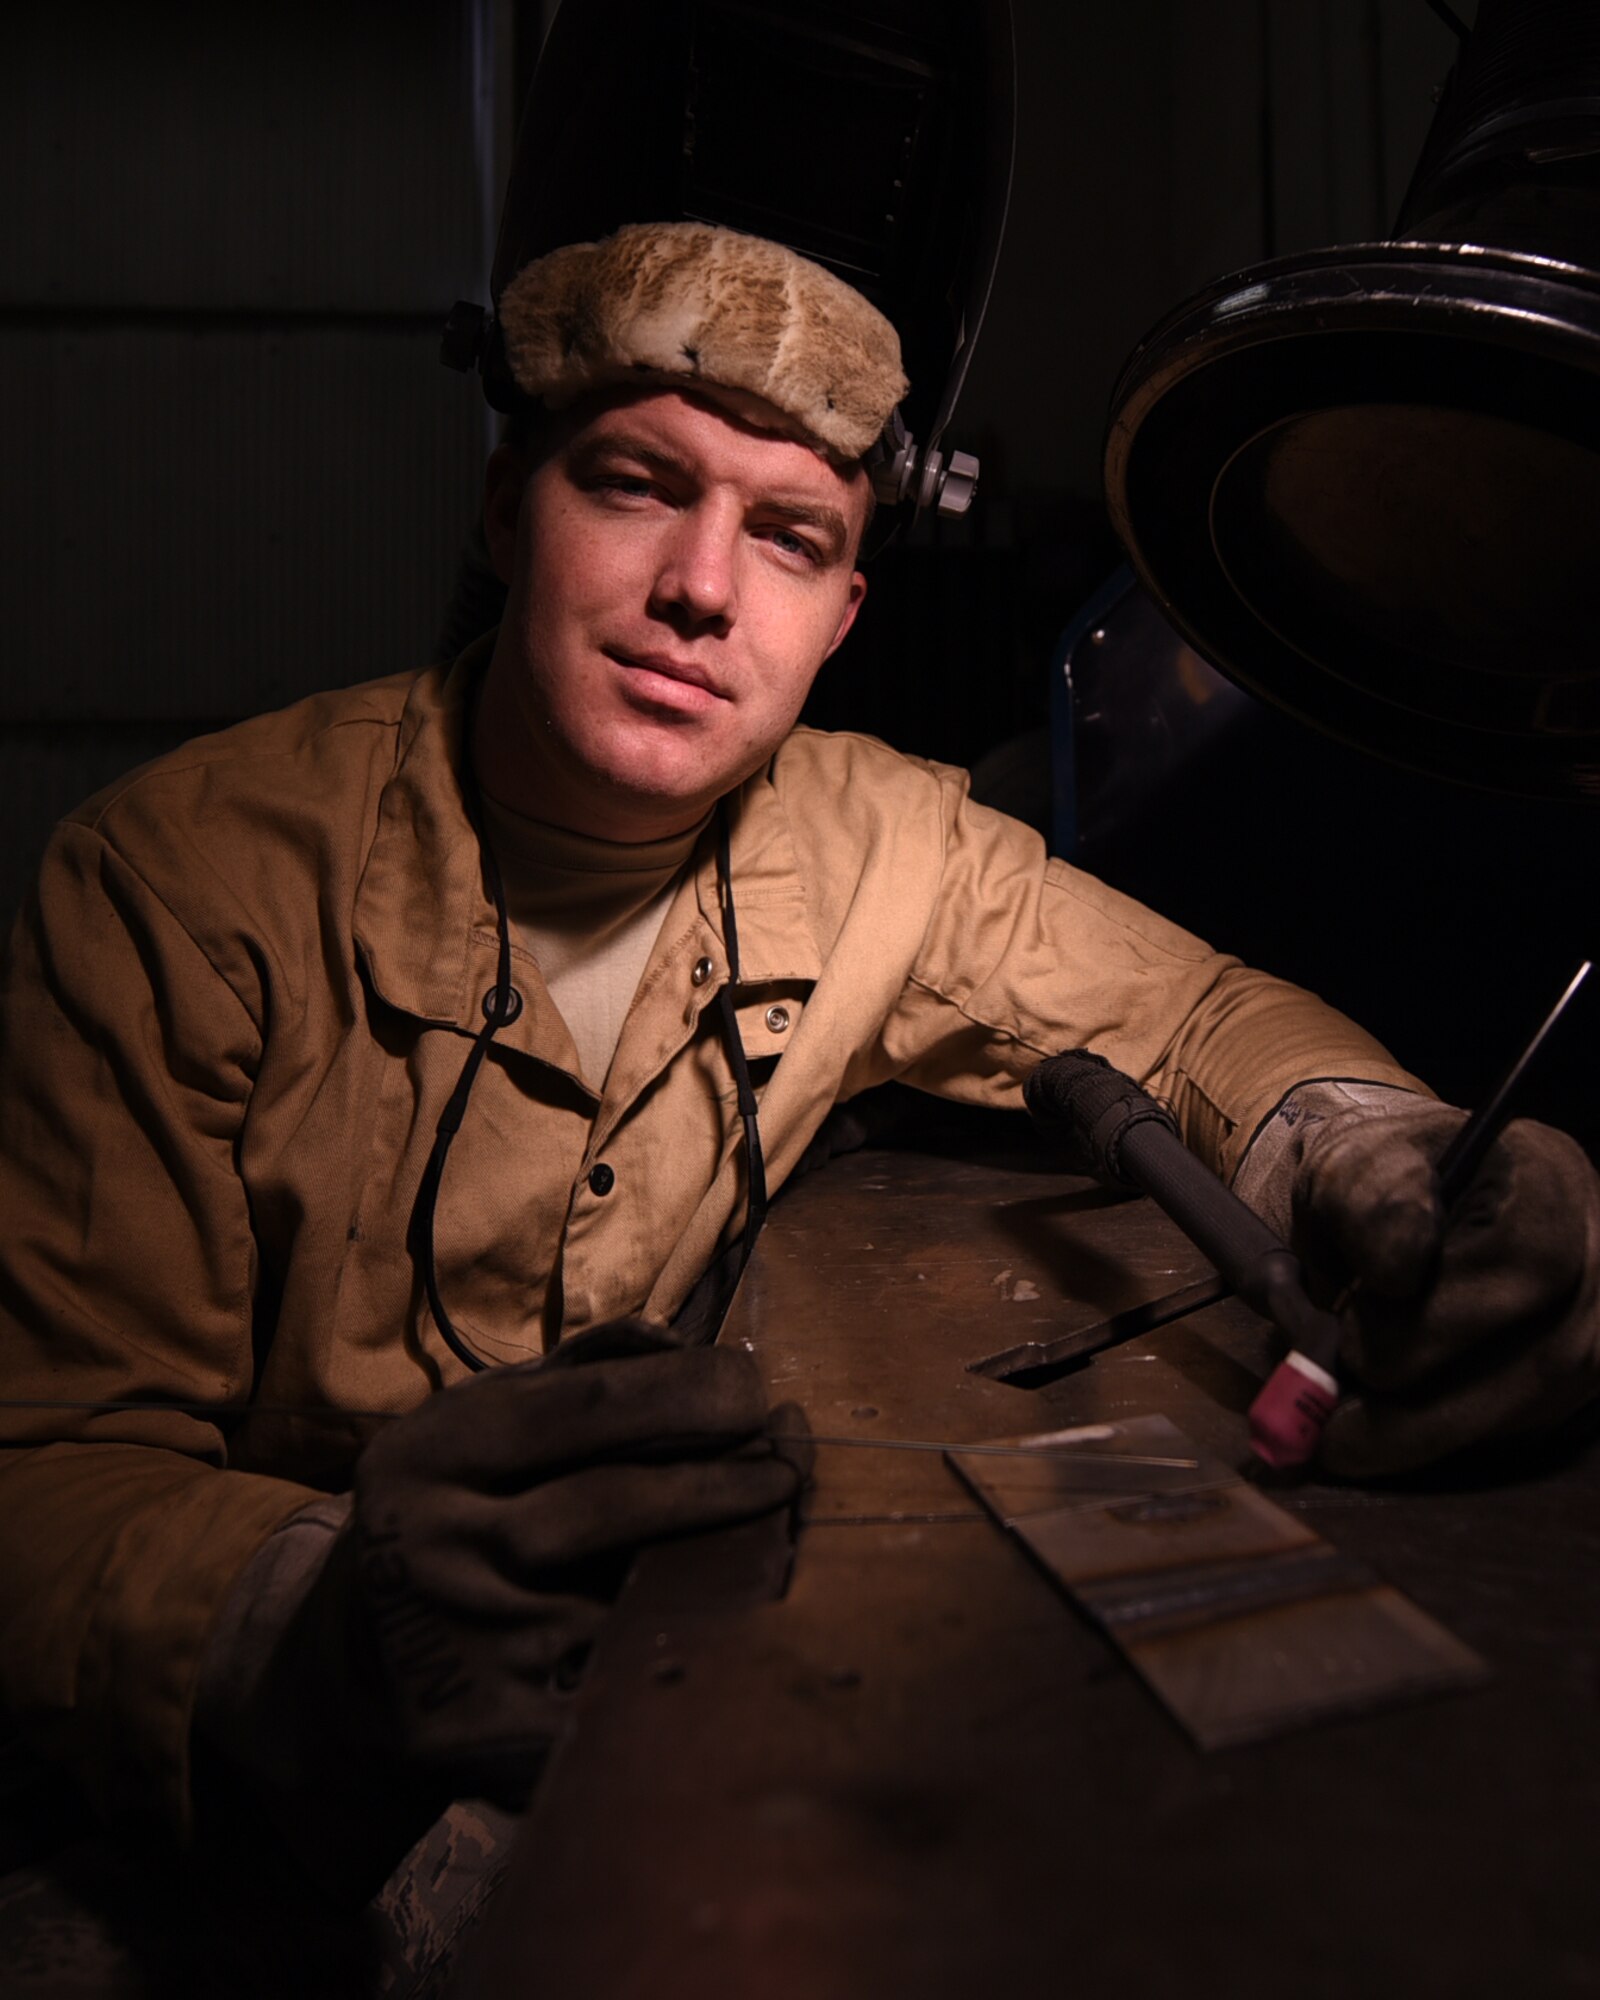 U.S. Air Force Senior Airman Andrew Herrick, 19th Maintenance Squadron Aircraft Metals Technology journeyman, supports the Combat Airlift mission by welding and manufacturing aircraft parts. The metals tech Airmen are responsible for repairing and manufacturing essential aircraft components and flight line equipment using welding and milling machines. (U.S. Air Force photo by Airman 1st Class Kevin Sommer Giron)